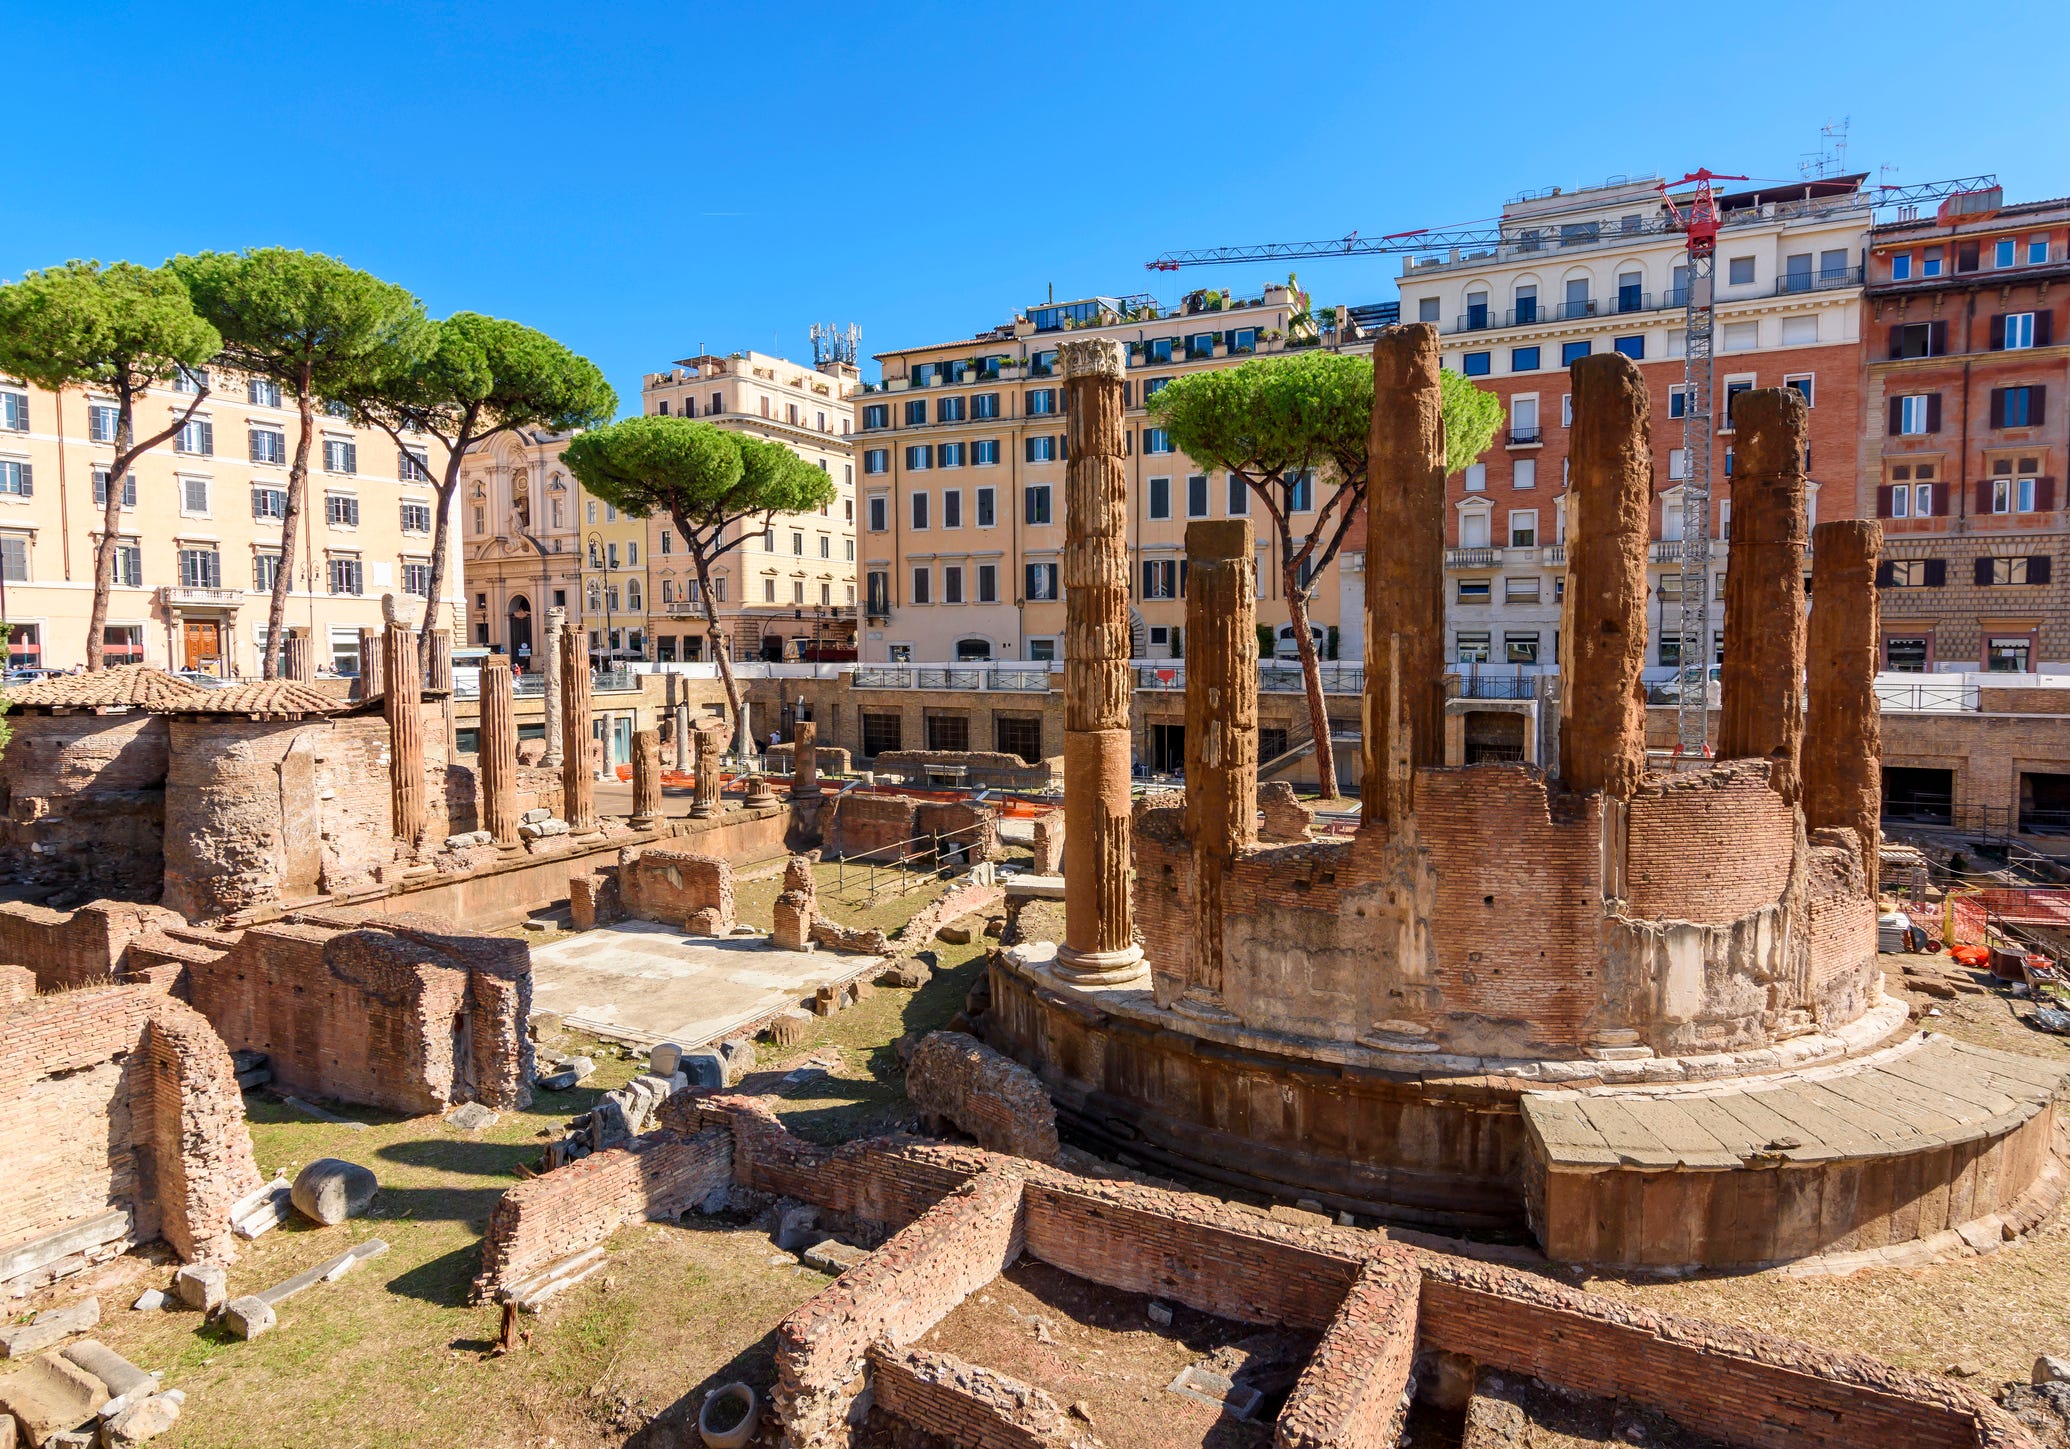 <p>Positioned in the center of one of the city's busiest intersections is a small archaeological area made infamous for being the location of Julius Caesar's assassination. </p><p>The archaeological complex holds the remains of four temples and a theater dating back to the Republican period.</p><p>The archaeological area also serves as a cat sanctuary for the city's strays — it's not uncommon to see groups of them lounging around the ruins. They're cared for by local volunteers who accept donations by way of an <a href="https://www.gattidiroma.net/web/en/distance-cat-adoption-from-rome-largo-argentina-cat-sanctuary/">Adoption at a Distance program</a>.</p>